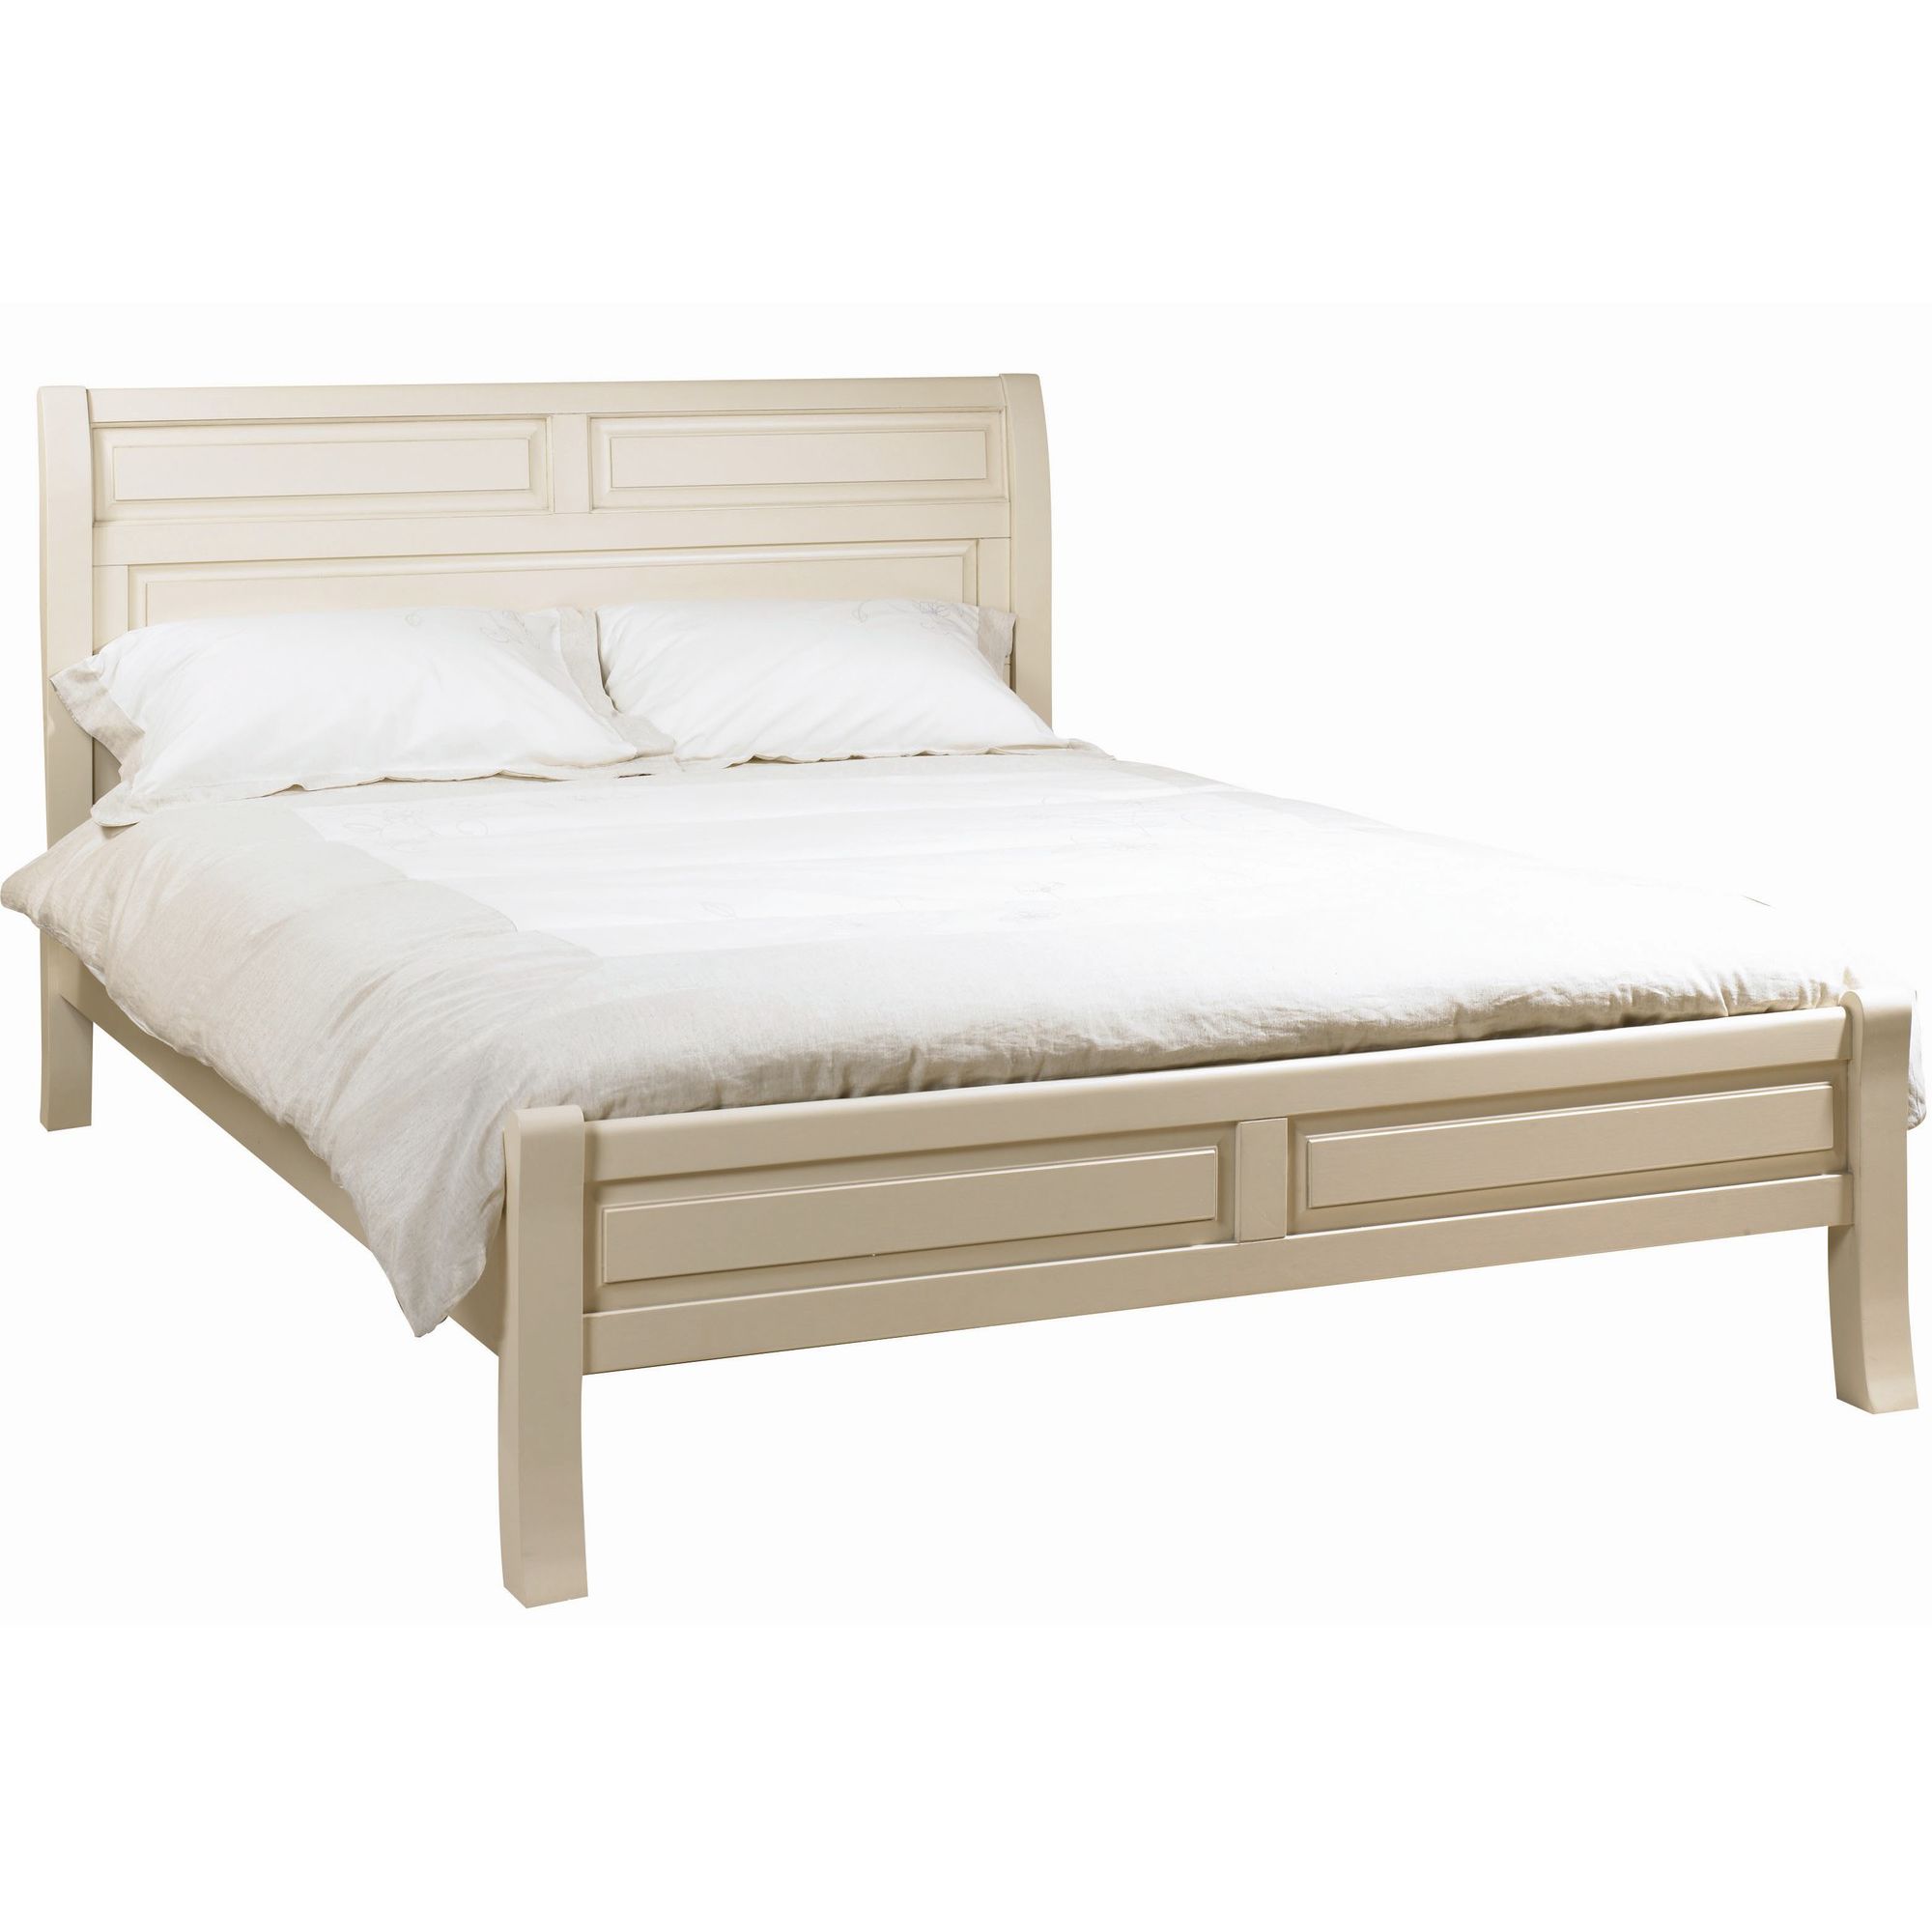 YP Furniture Country House Bedstead including Headboard and Footboard - Double at Tescos Direct